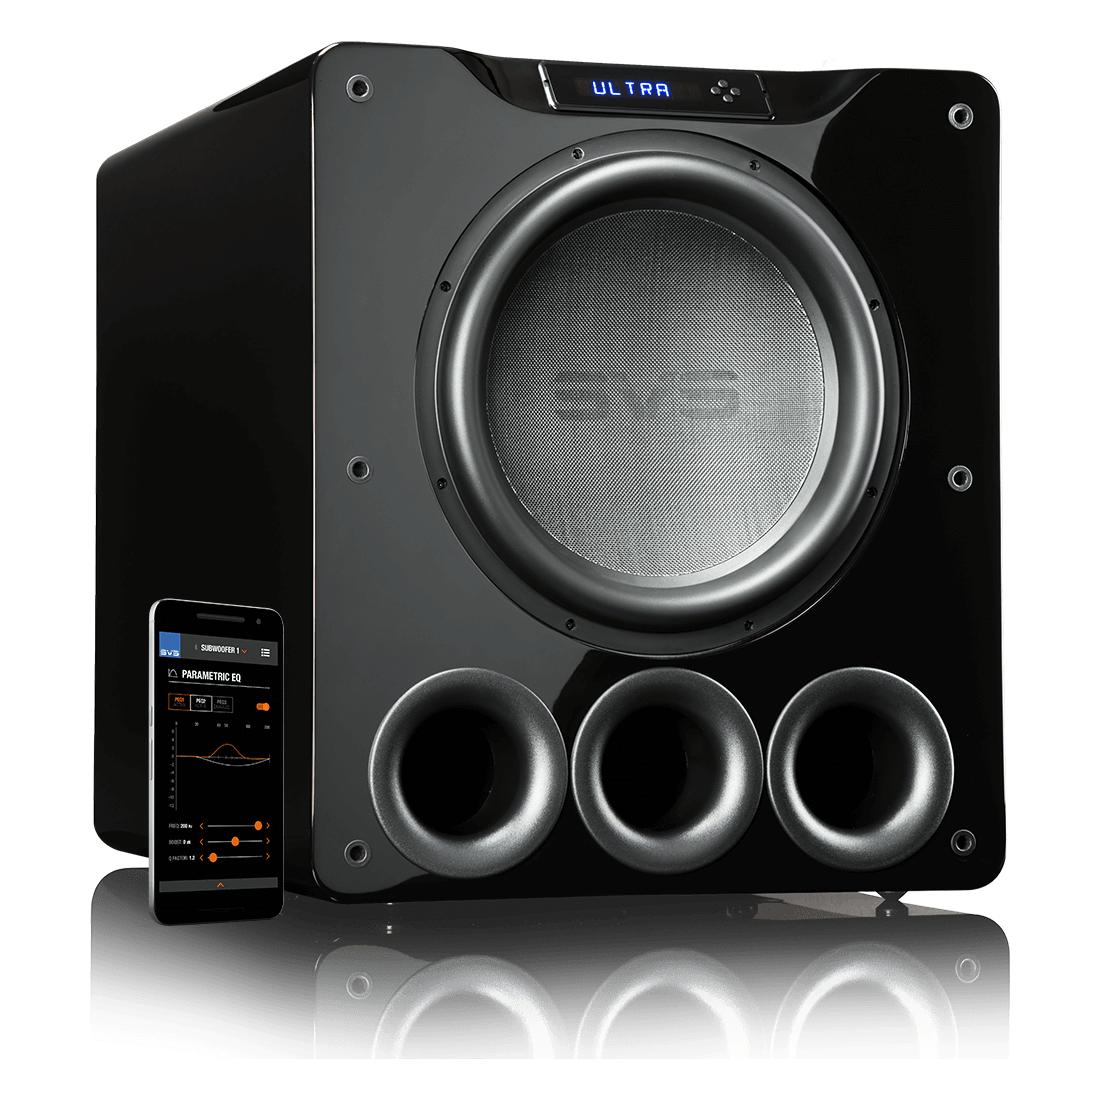 The ultimate reference standard for bass, PB16-Ultra redefines what is possible from a ported cabinet subwoofer design with cost-no-object design and engineering. PB16-Ultra One Subwoofer to Rule Them All. Introducing the PB16-Ultra. An unrelenting passion for breathtaking bass performance and engineering perfection guided every aspect of the PB16-Ultra subwoofer’s development.